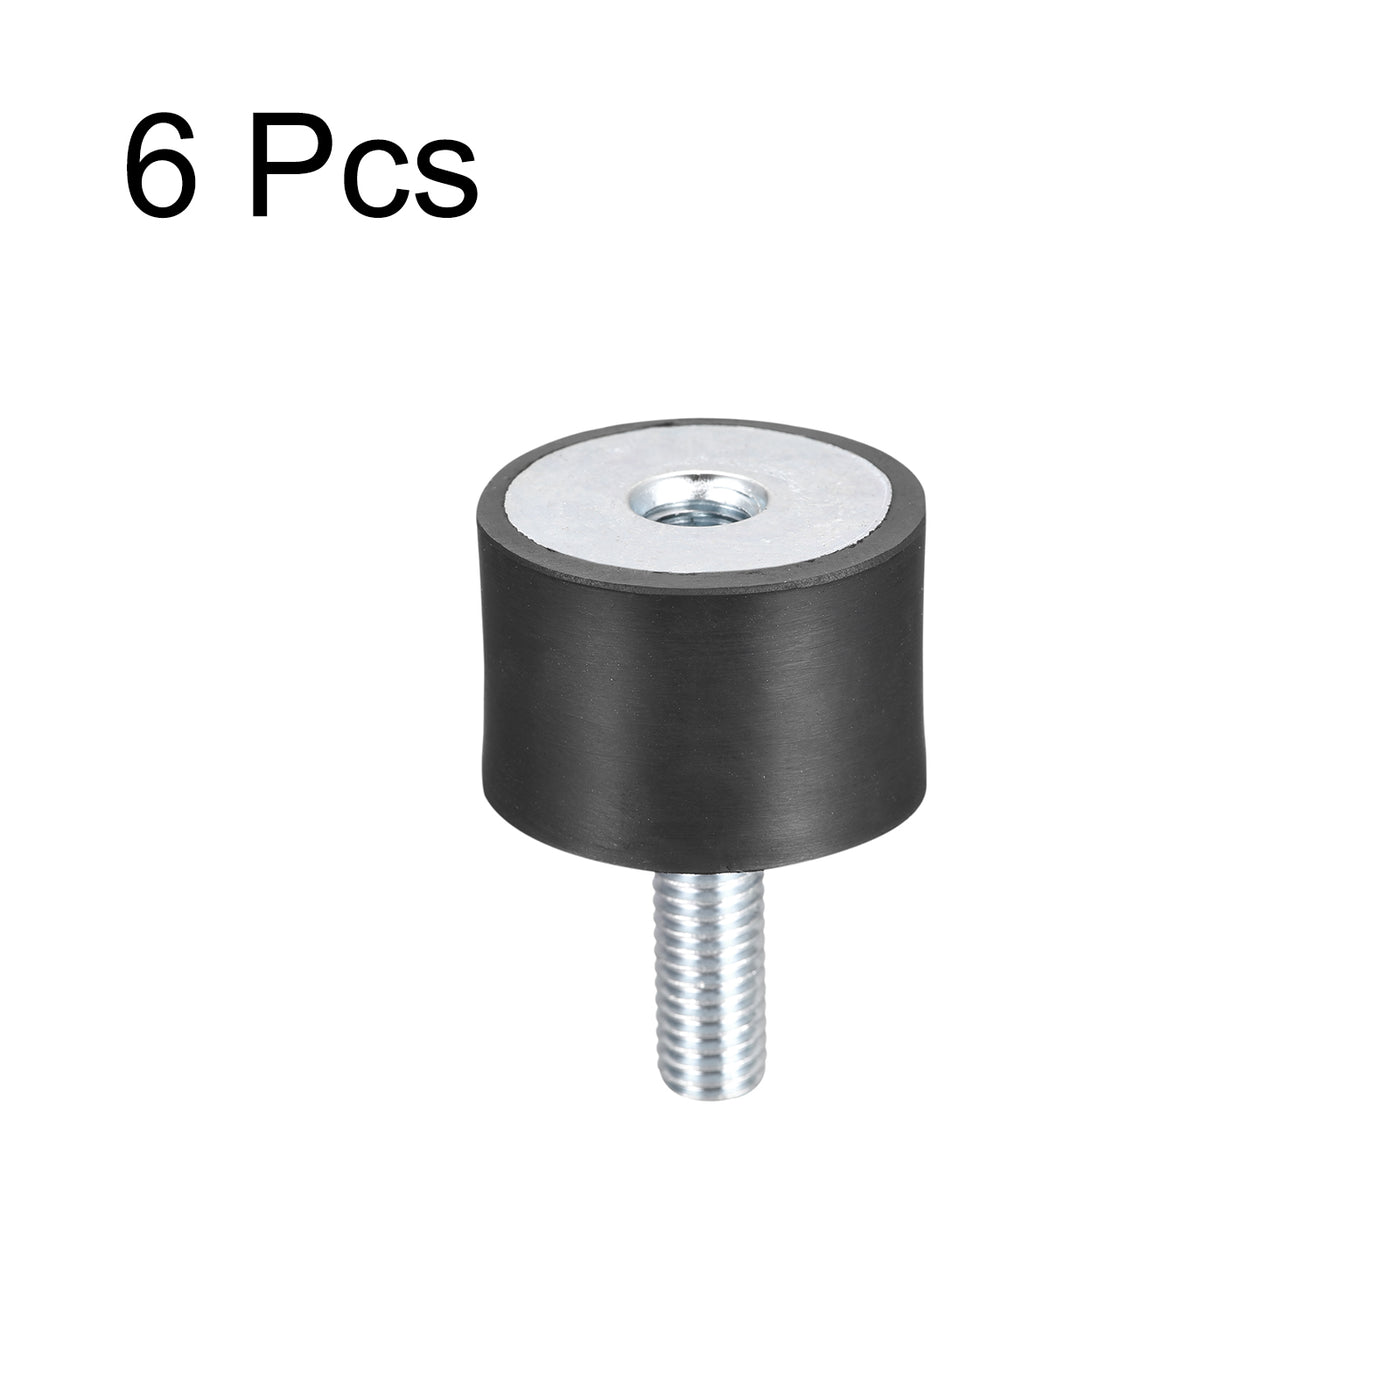 uxcell Uxcell Rubber Mount 6pcs M8 Male/Female Vibration Isolator Shock Absorber D30mmxH20mm